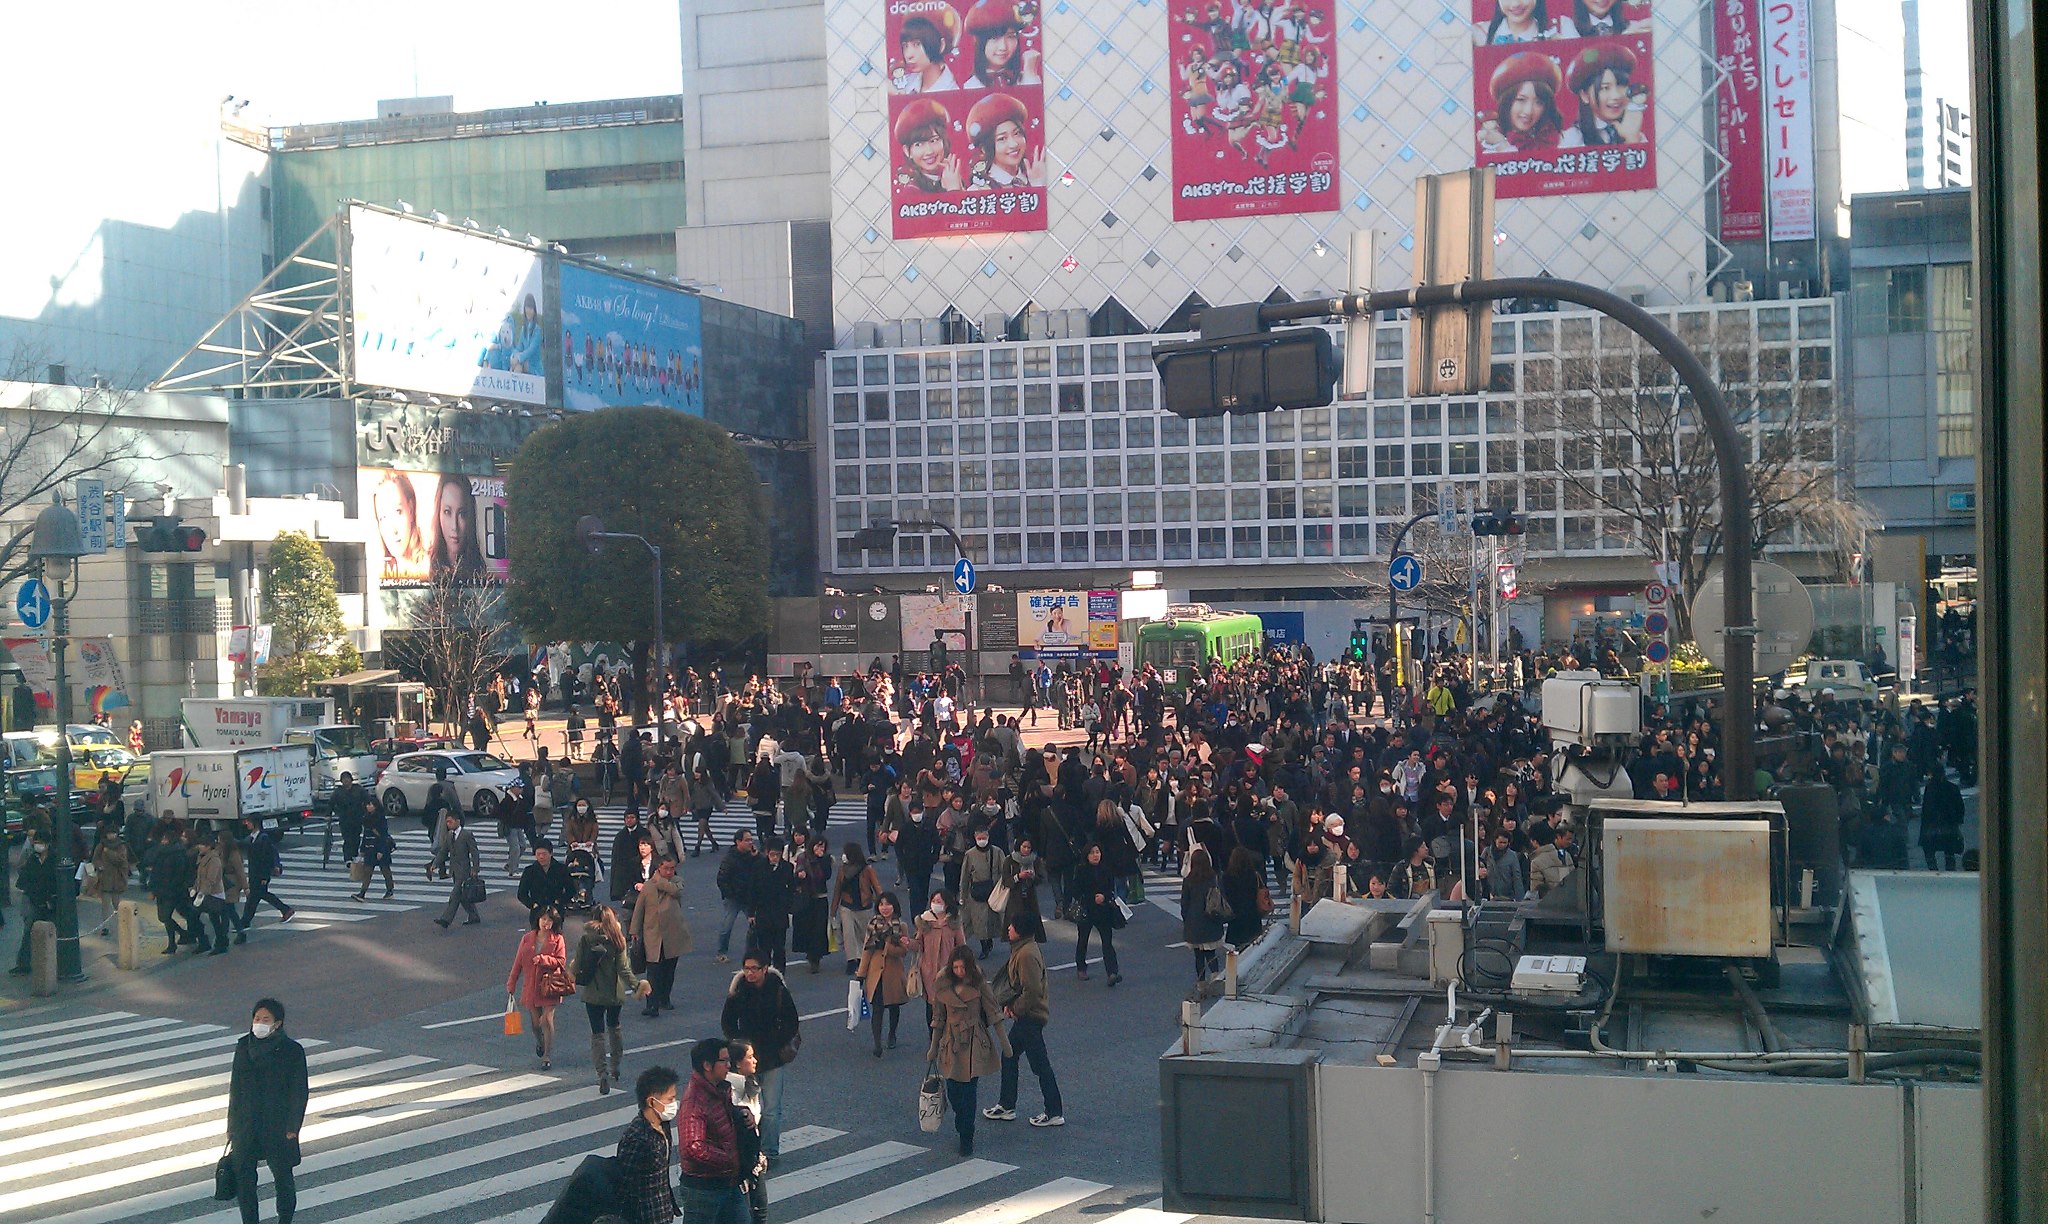 That famous crossing in Japan, yeah took this one